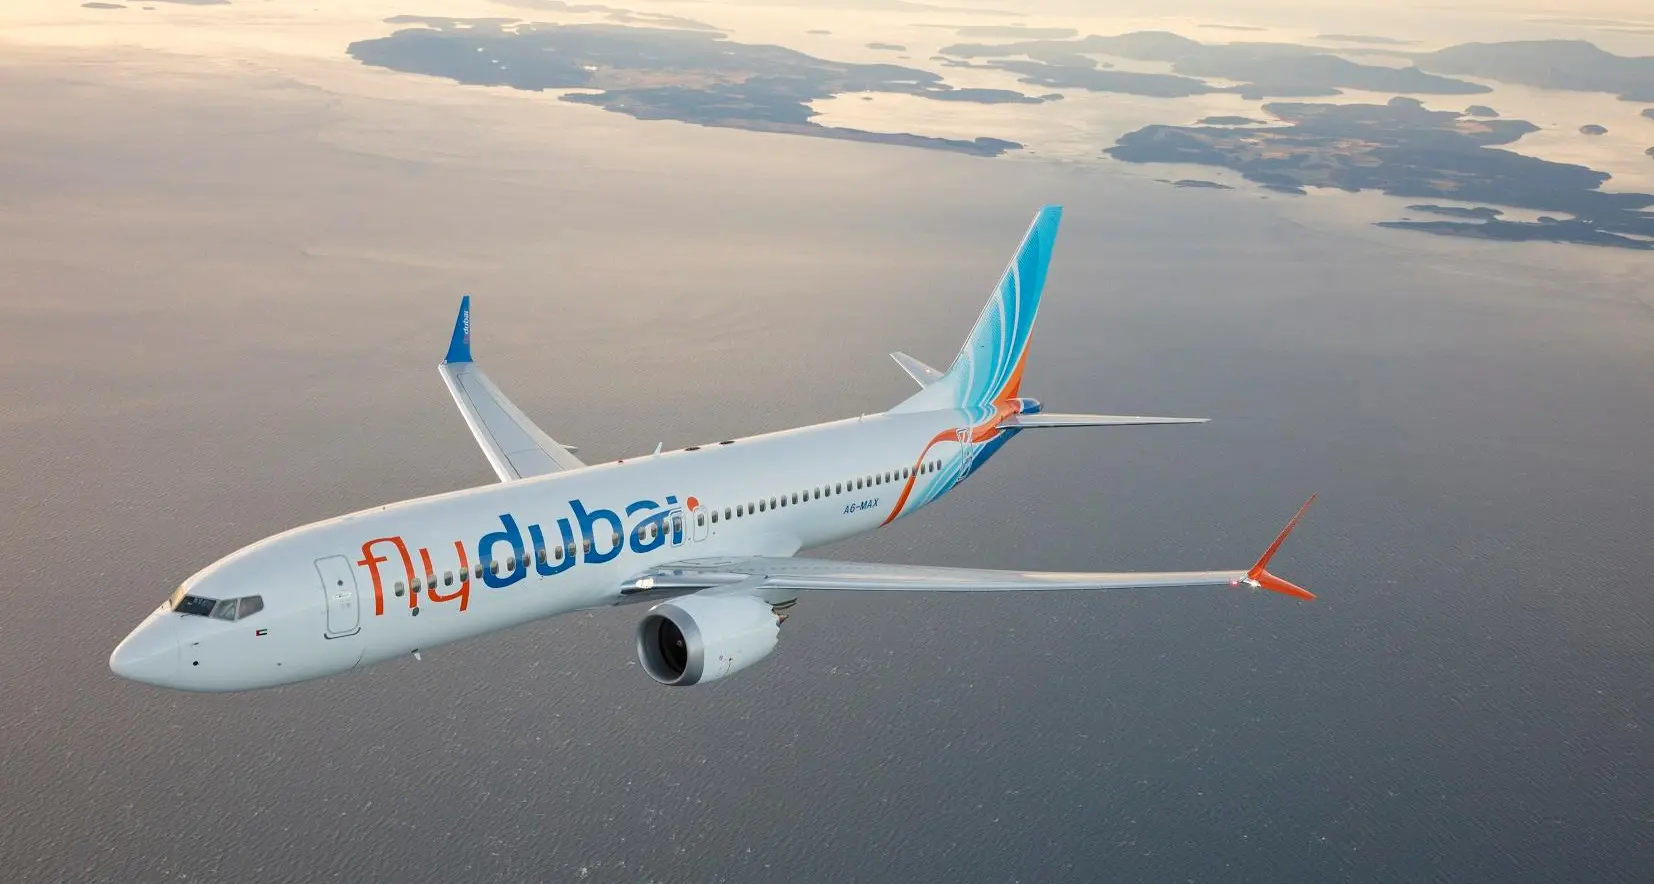 Flydubai resumes scheduled operations from DXB